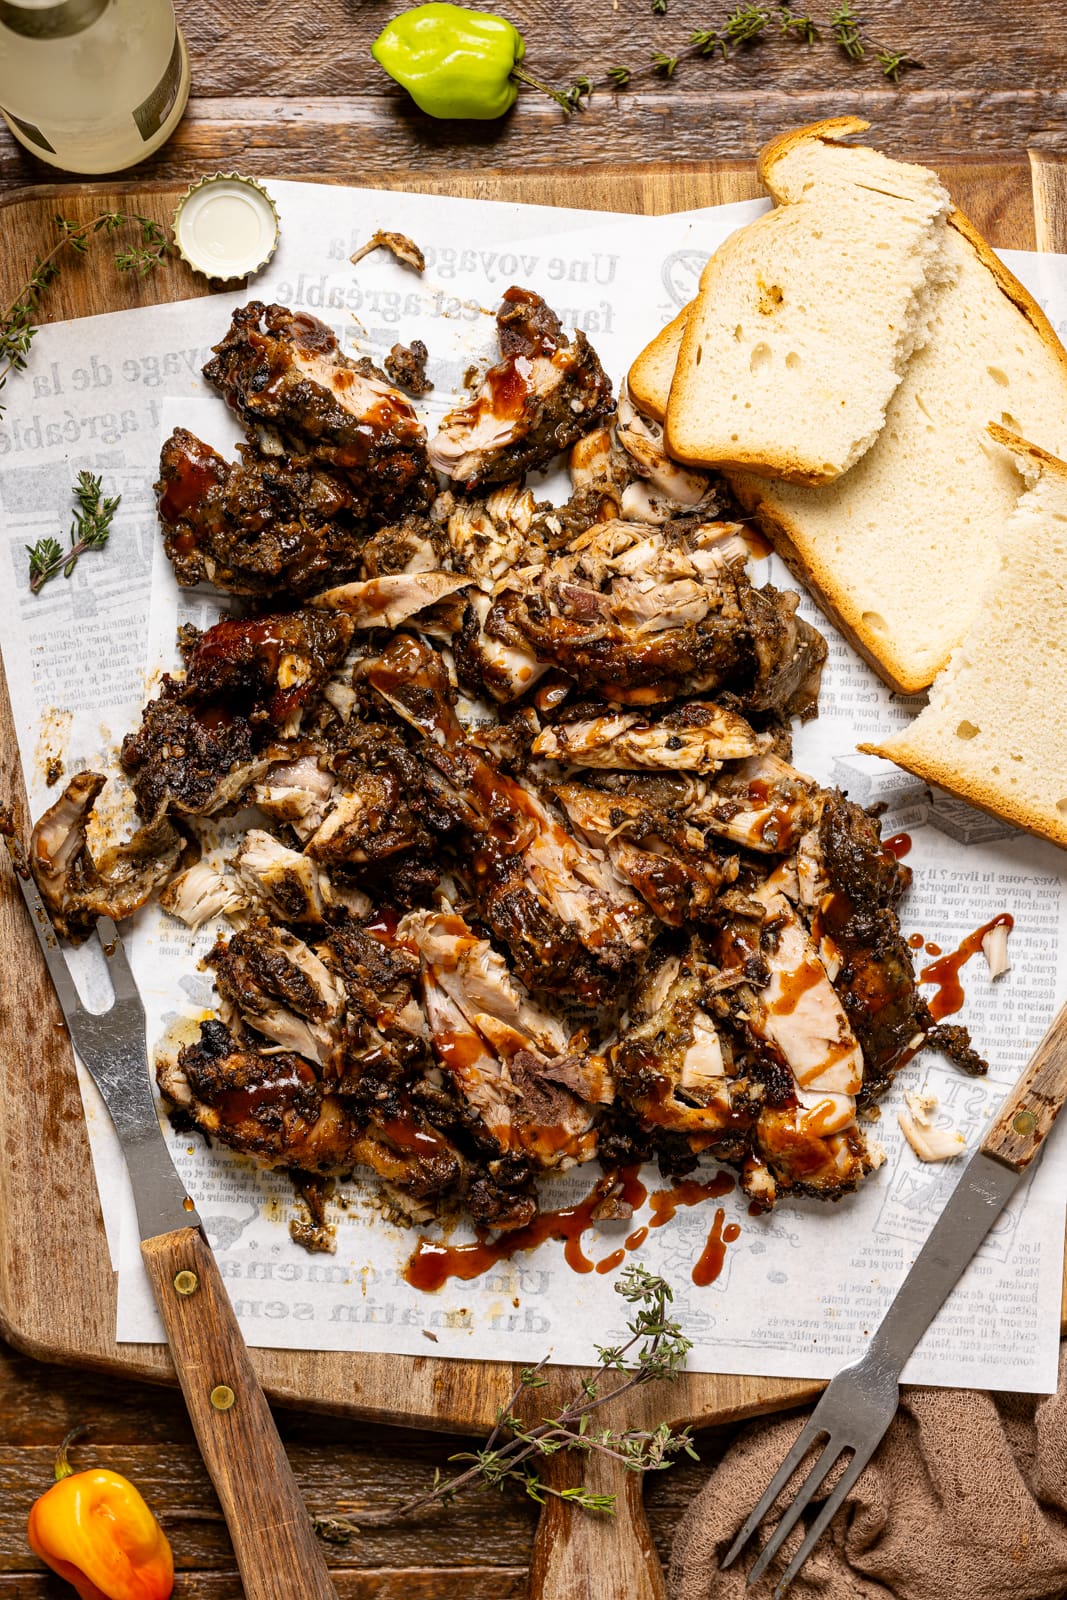 Chopped jerk chicken on a cutting board with bread and a fork.